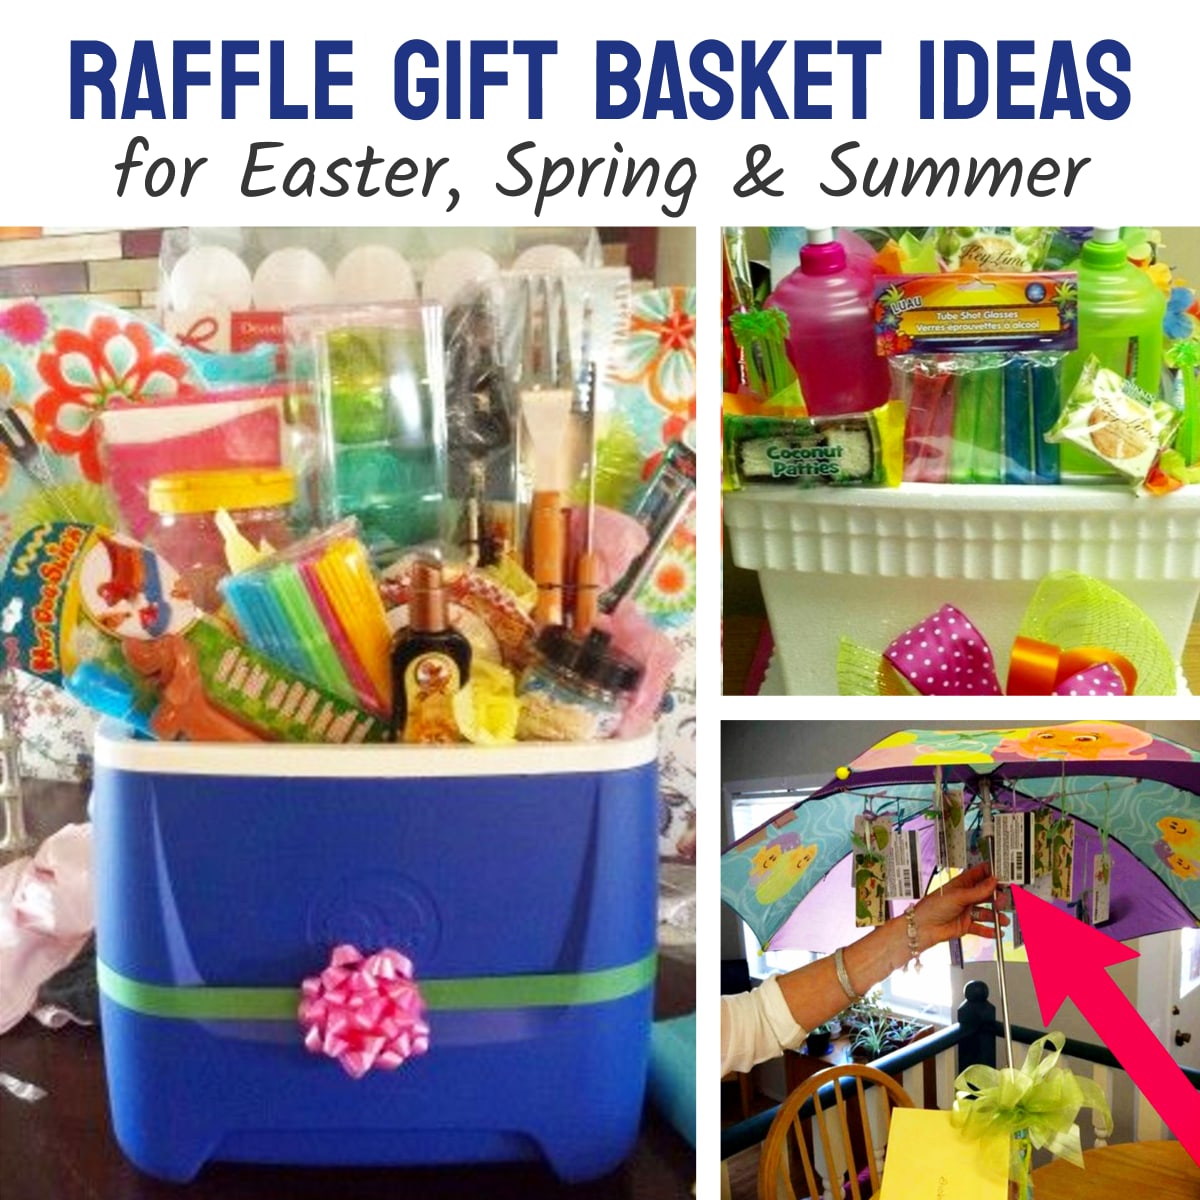 raffle gift basket ideas for Easter, Spring and Summer fundraisers or a Grand Prize raffle prize